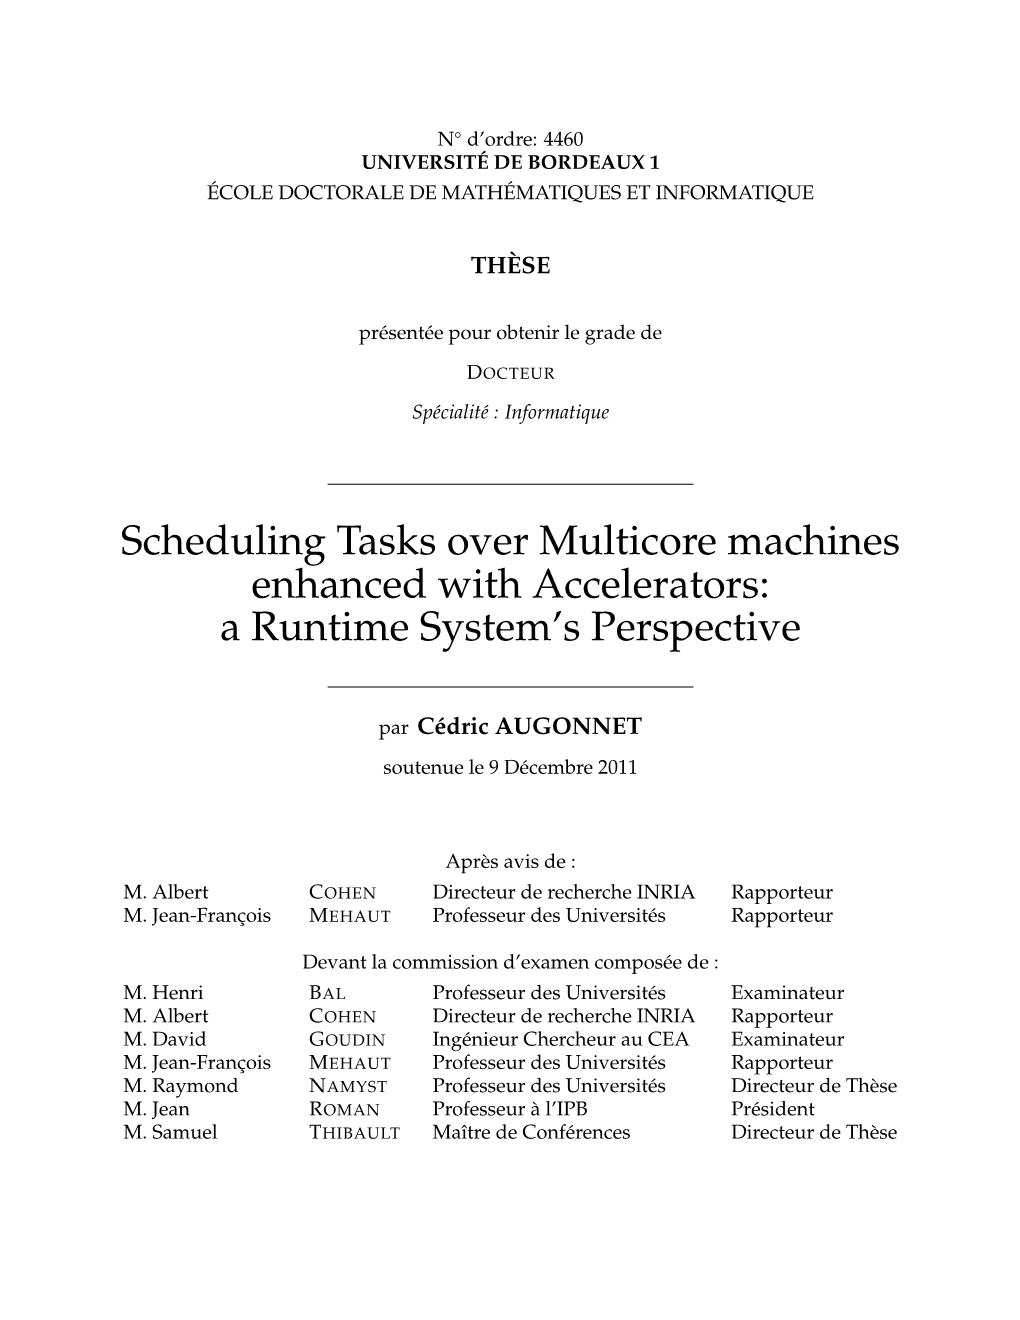 Scheduling Tasks Over Multicore Machines Enhanced with Accelerators: a Runtime System’S Perspective